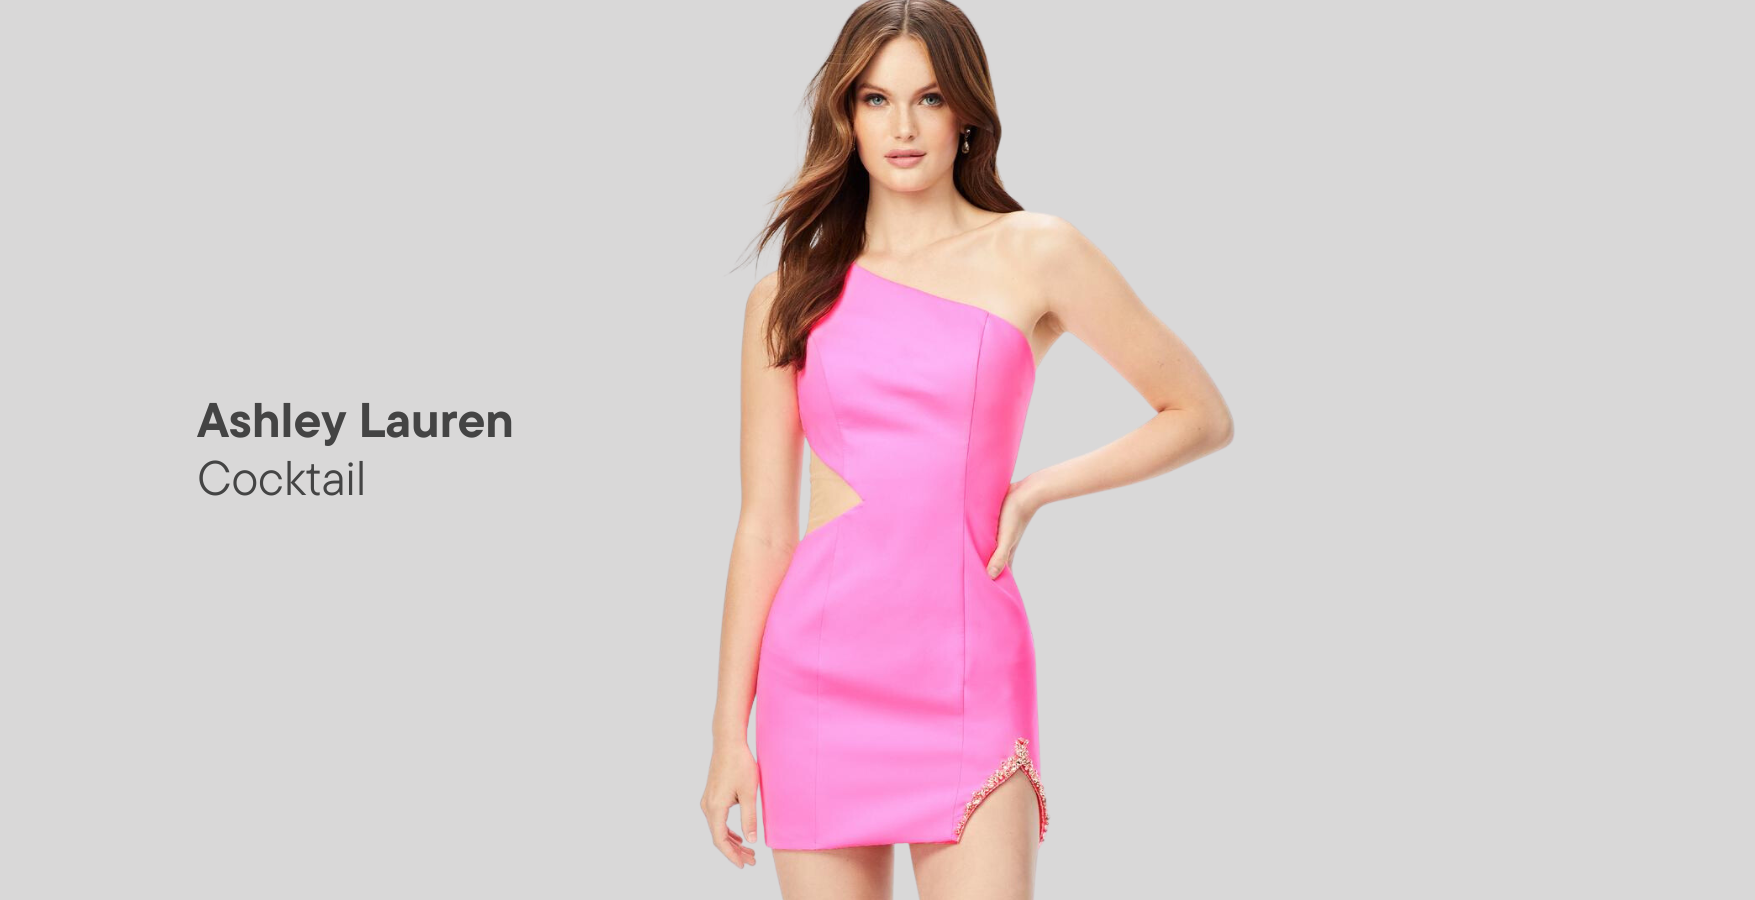 female wearing hot pink short dress with cut out with text reading 'Ashley Lauren Cocktail' on the left